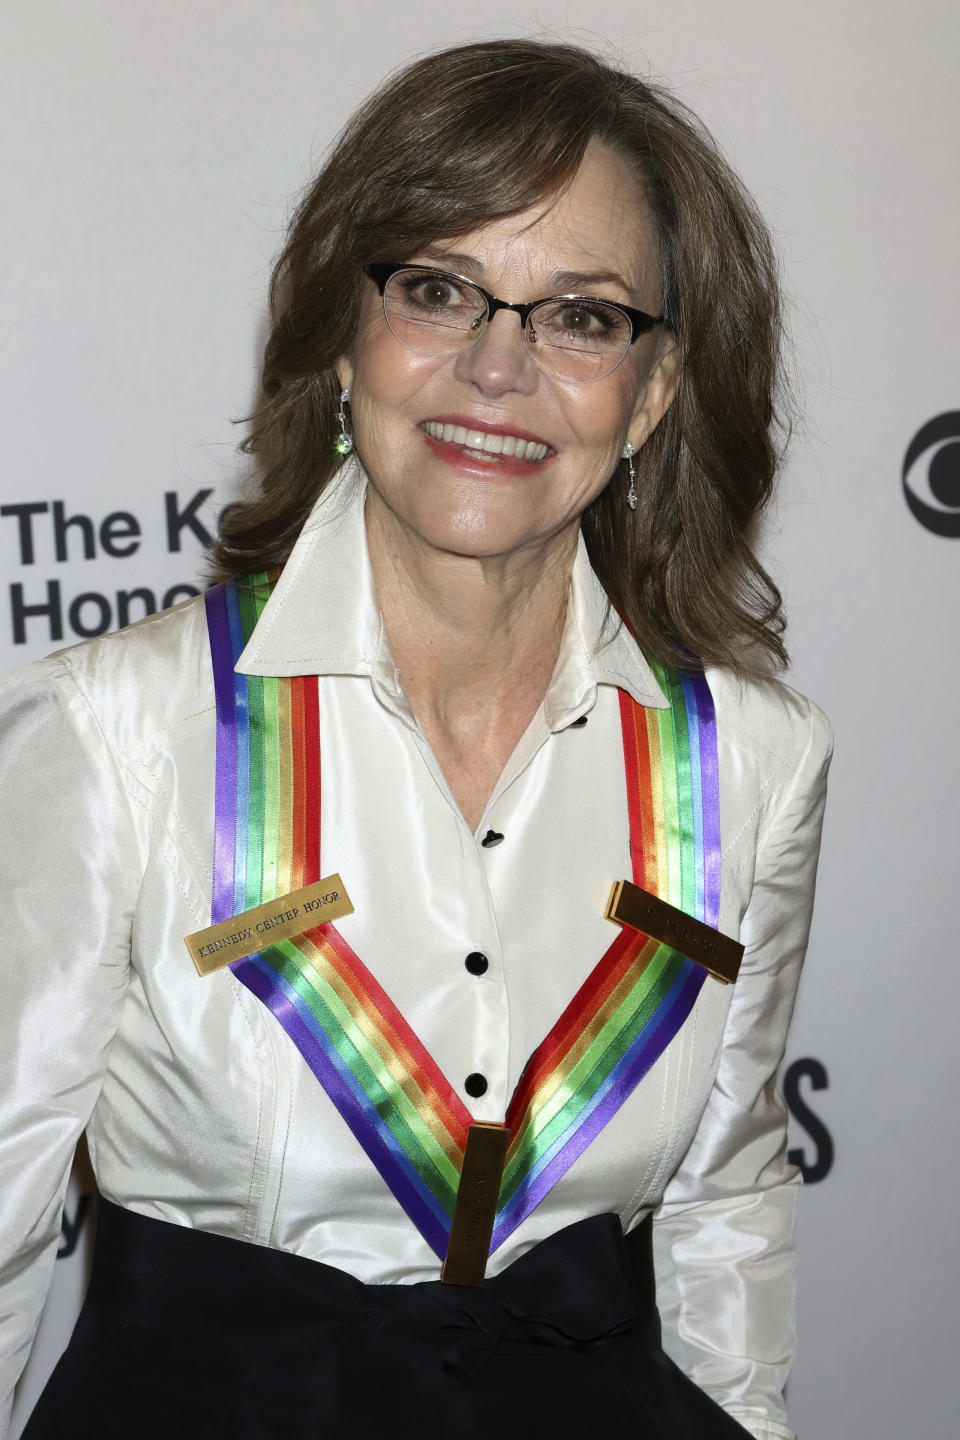 2019 Kennedy Center honoree Sally Field attends the 42nd Annual Kennedy Center Honors at The Kennedy Center, Sunday, Dec. 8, 2019, in Washington. (Photo by Greg Allen/Invision/AP)